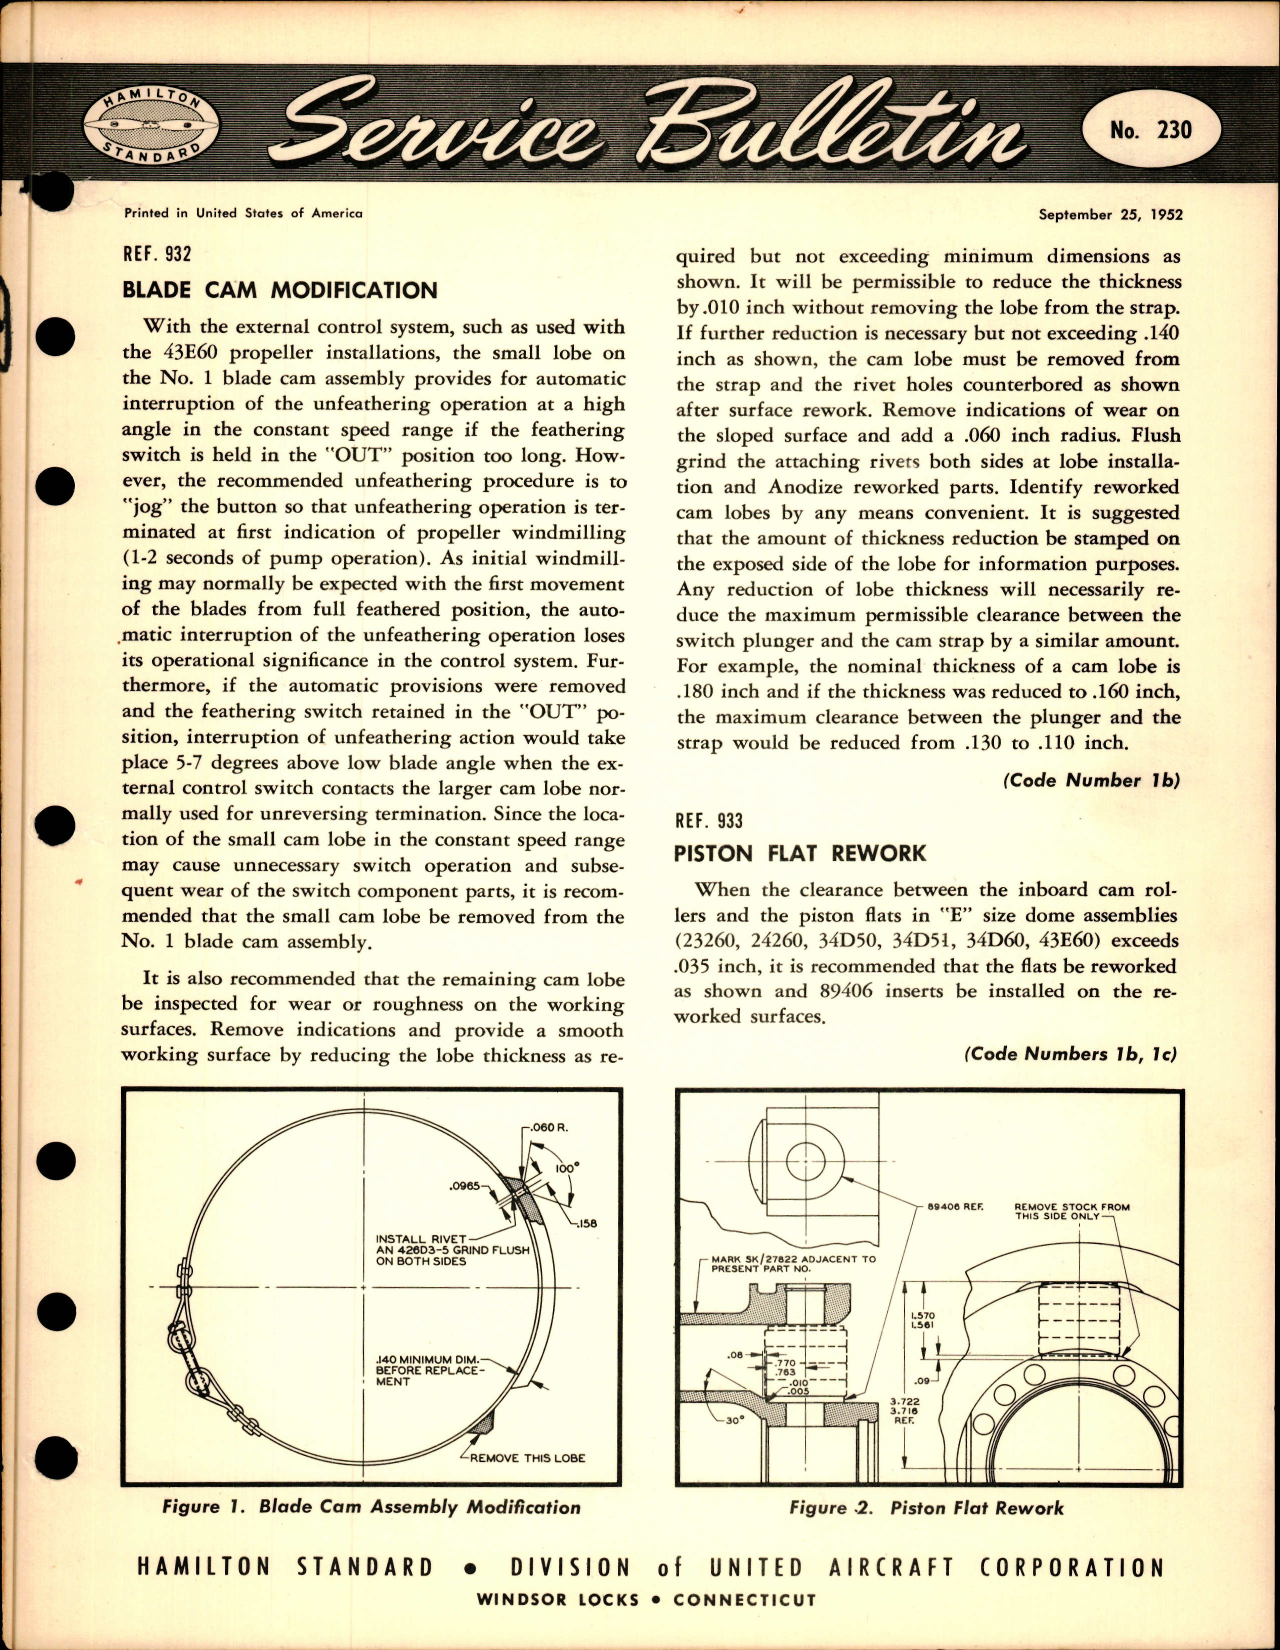 Sample page 1 from AirCorps Library document: Blade Cam Modification, Ref 932